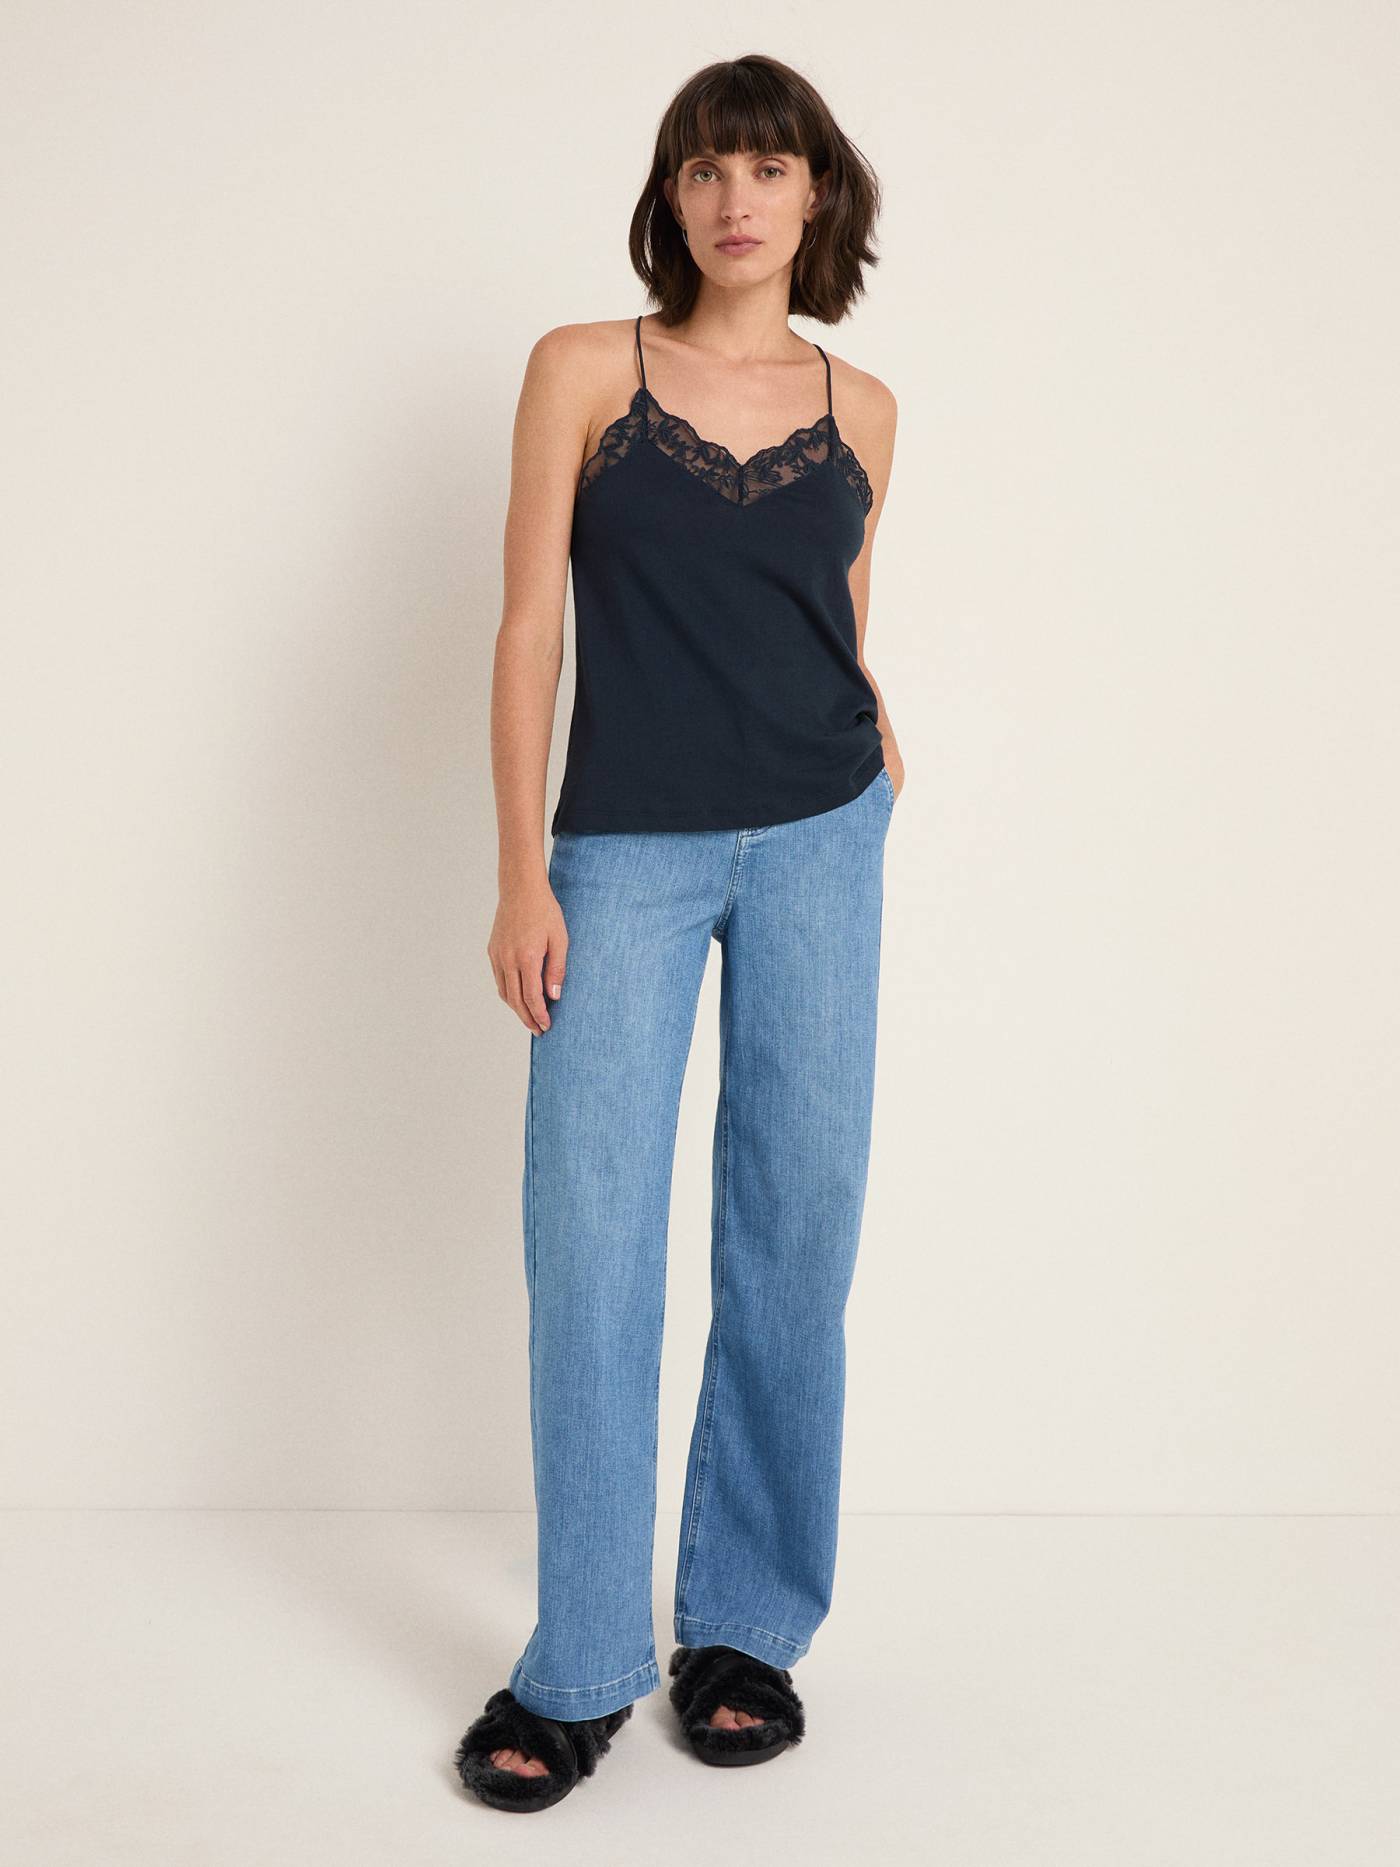 Top with lace from LANIUS